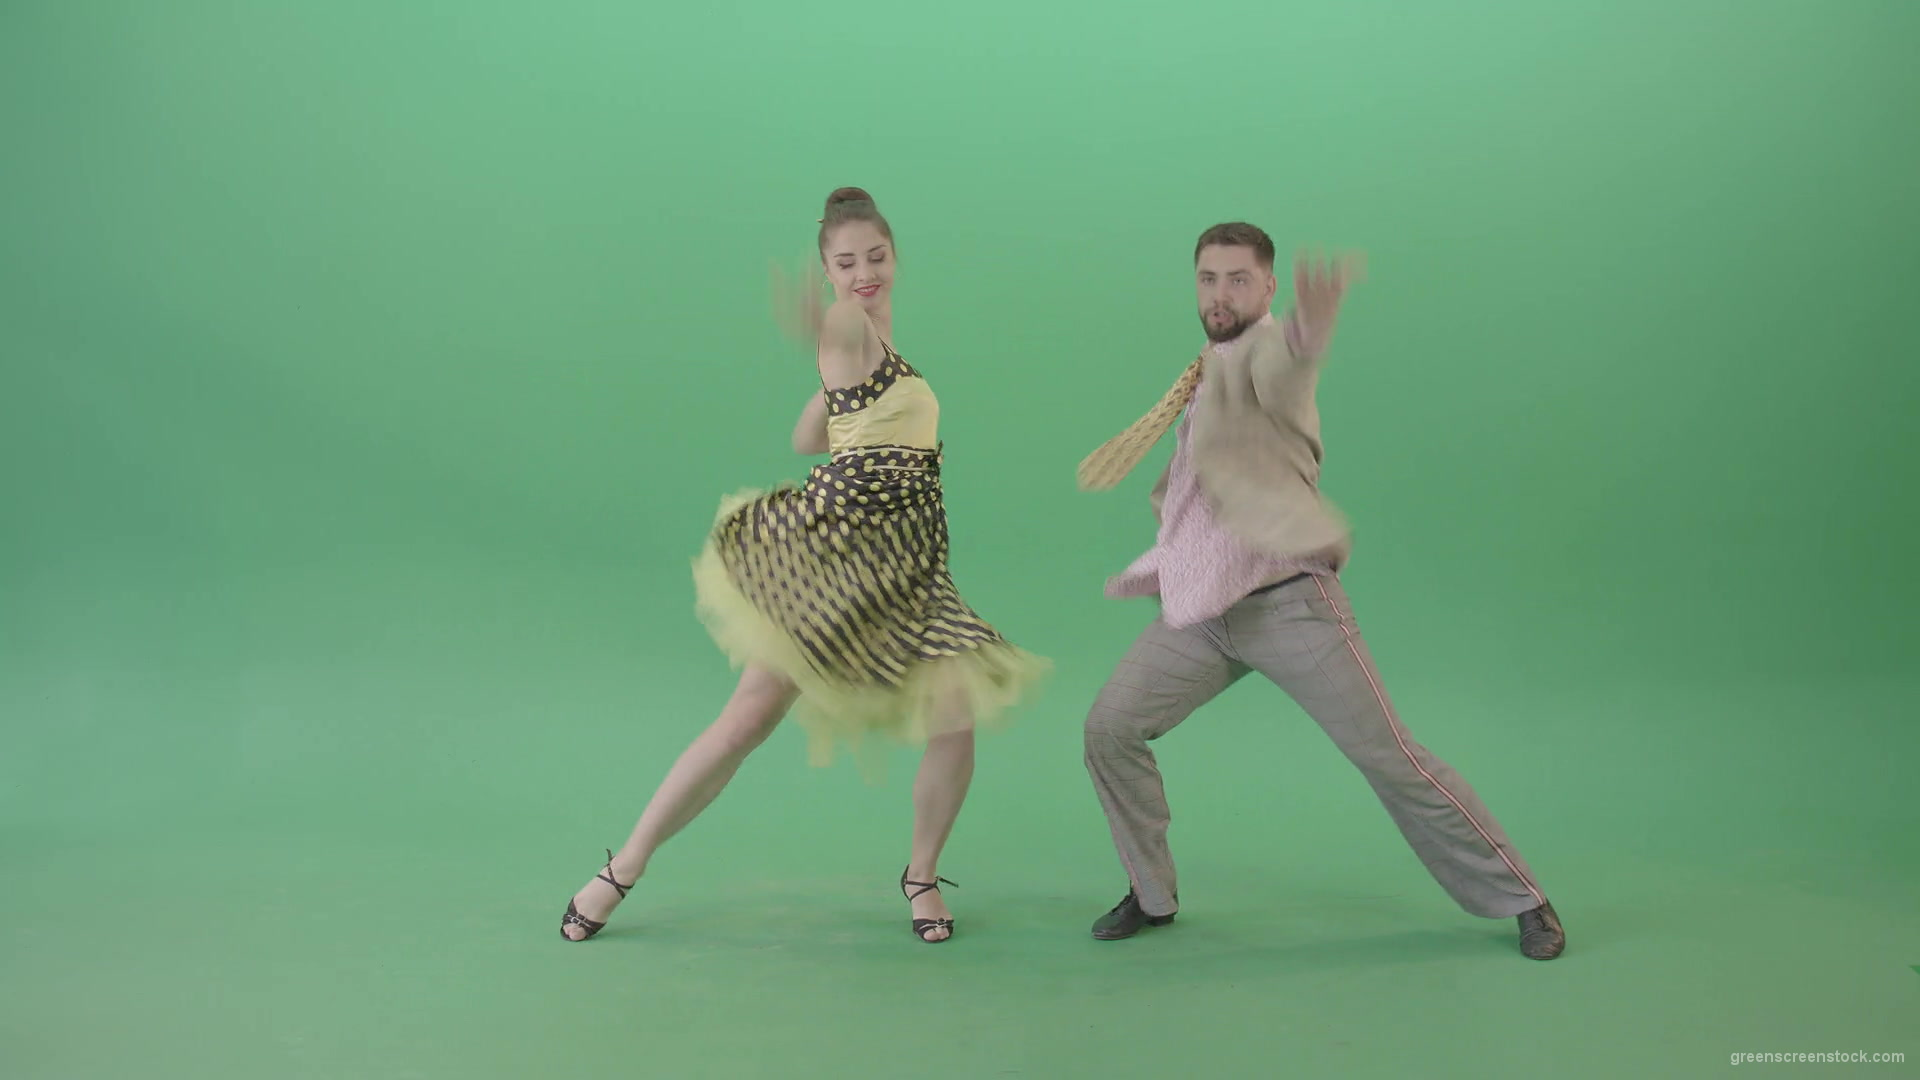 Beautiful-man-and-woman-dancing-Lindy-Hop-Jazz-and-Swing-dance-isolated-on-Green-Screen-4K-Video-Footage-1920_009 Green Screen Stock